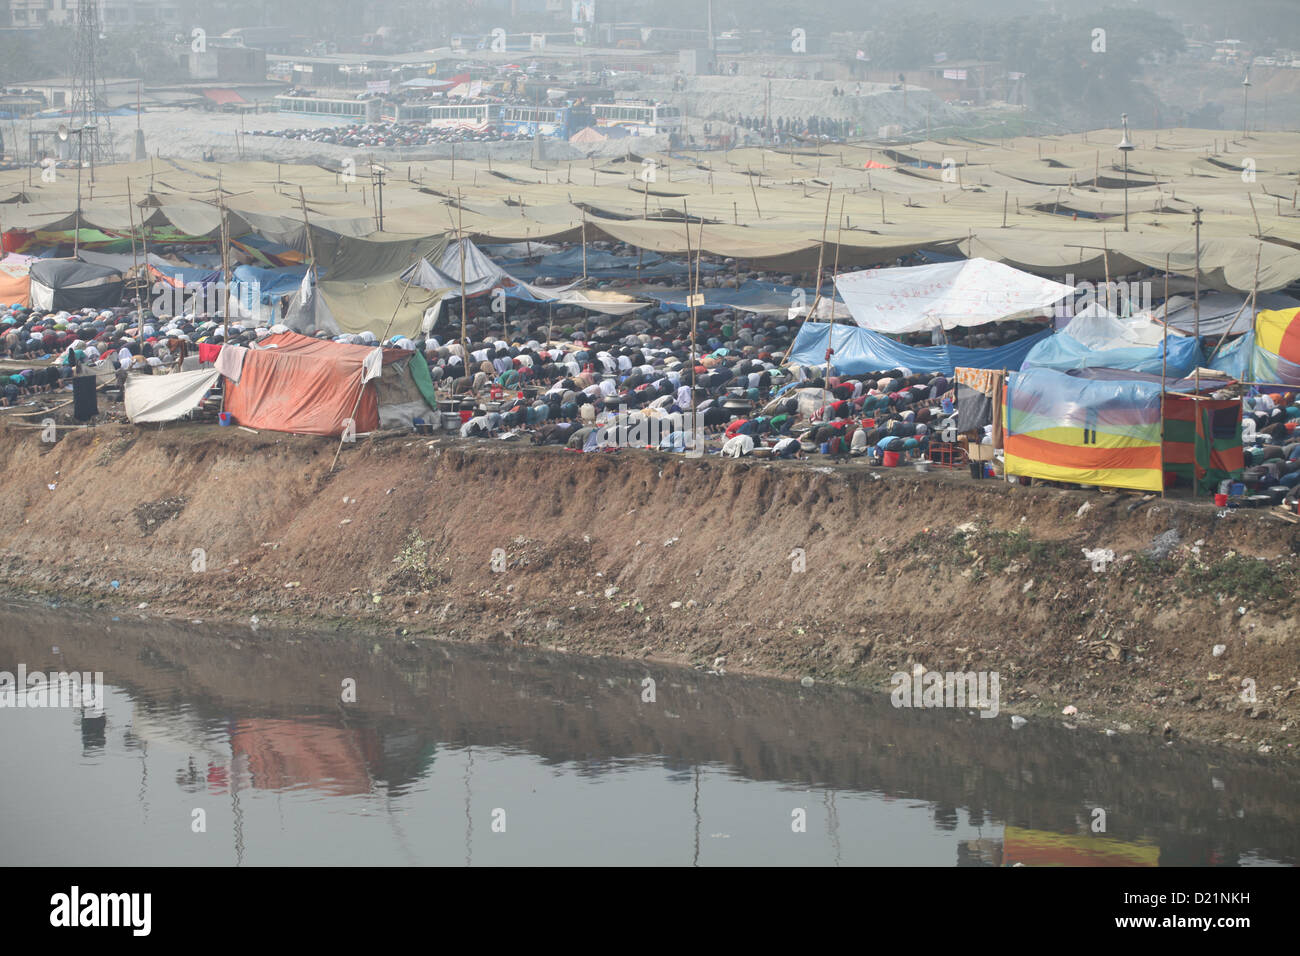 First phase of the Biswa Ijtema, one of the largest gatherings of Muslims in the world, begins on the banks of the Turag river Stock Photo